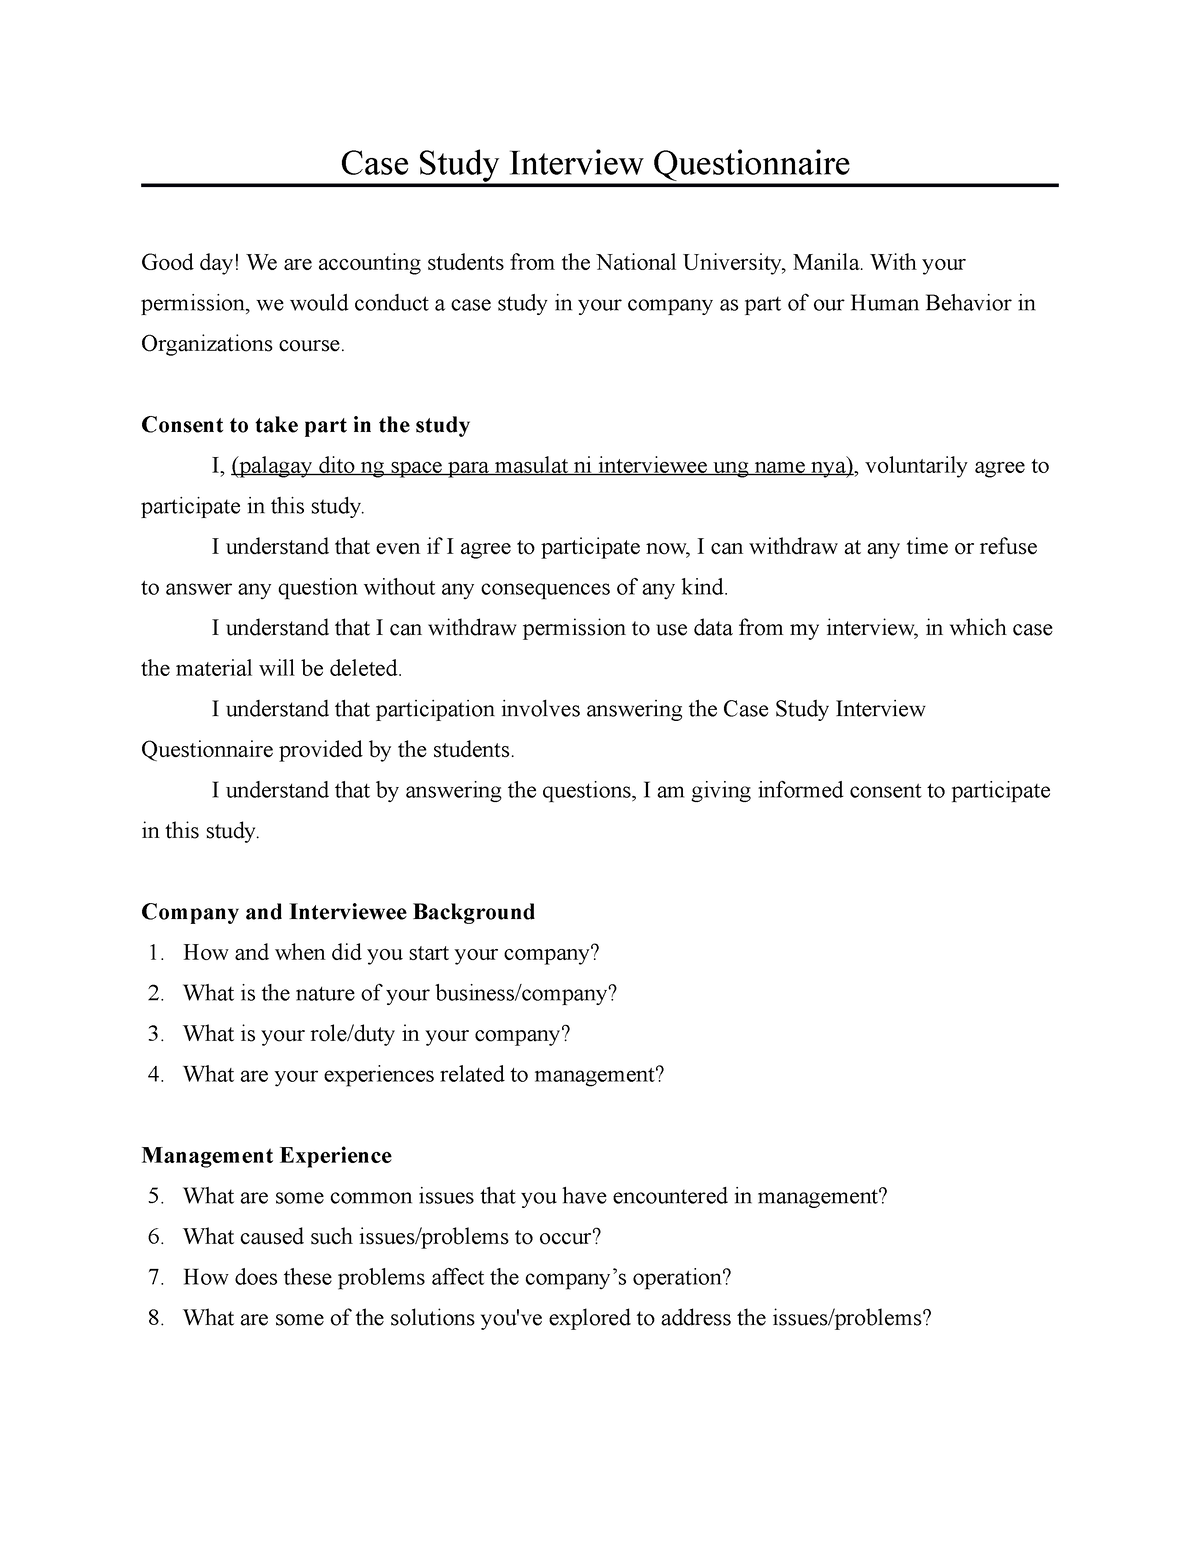 can case study use questionnaire